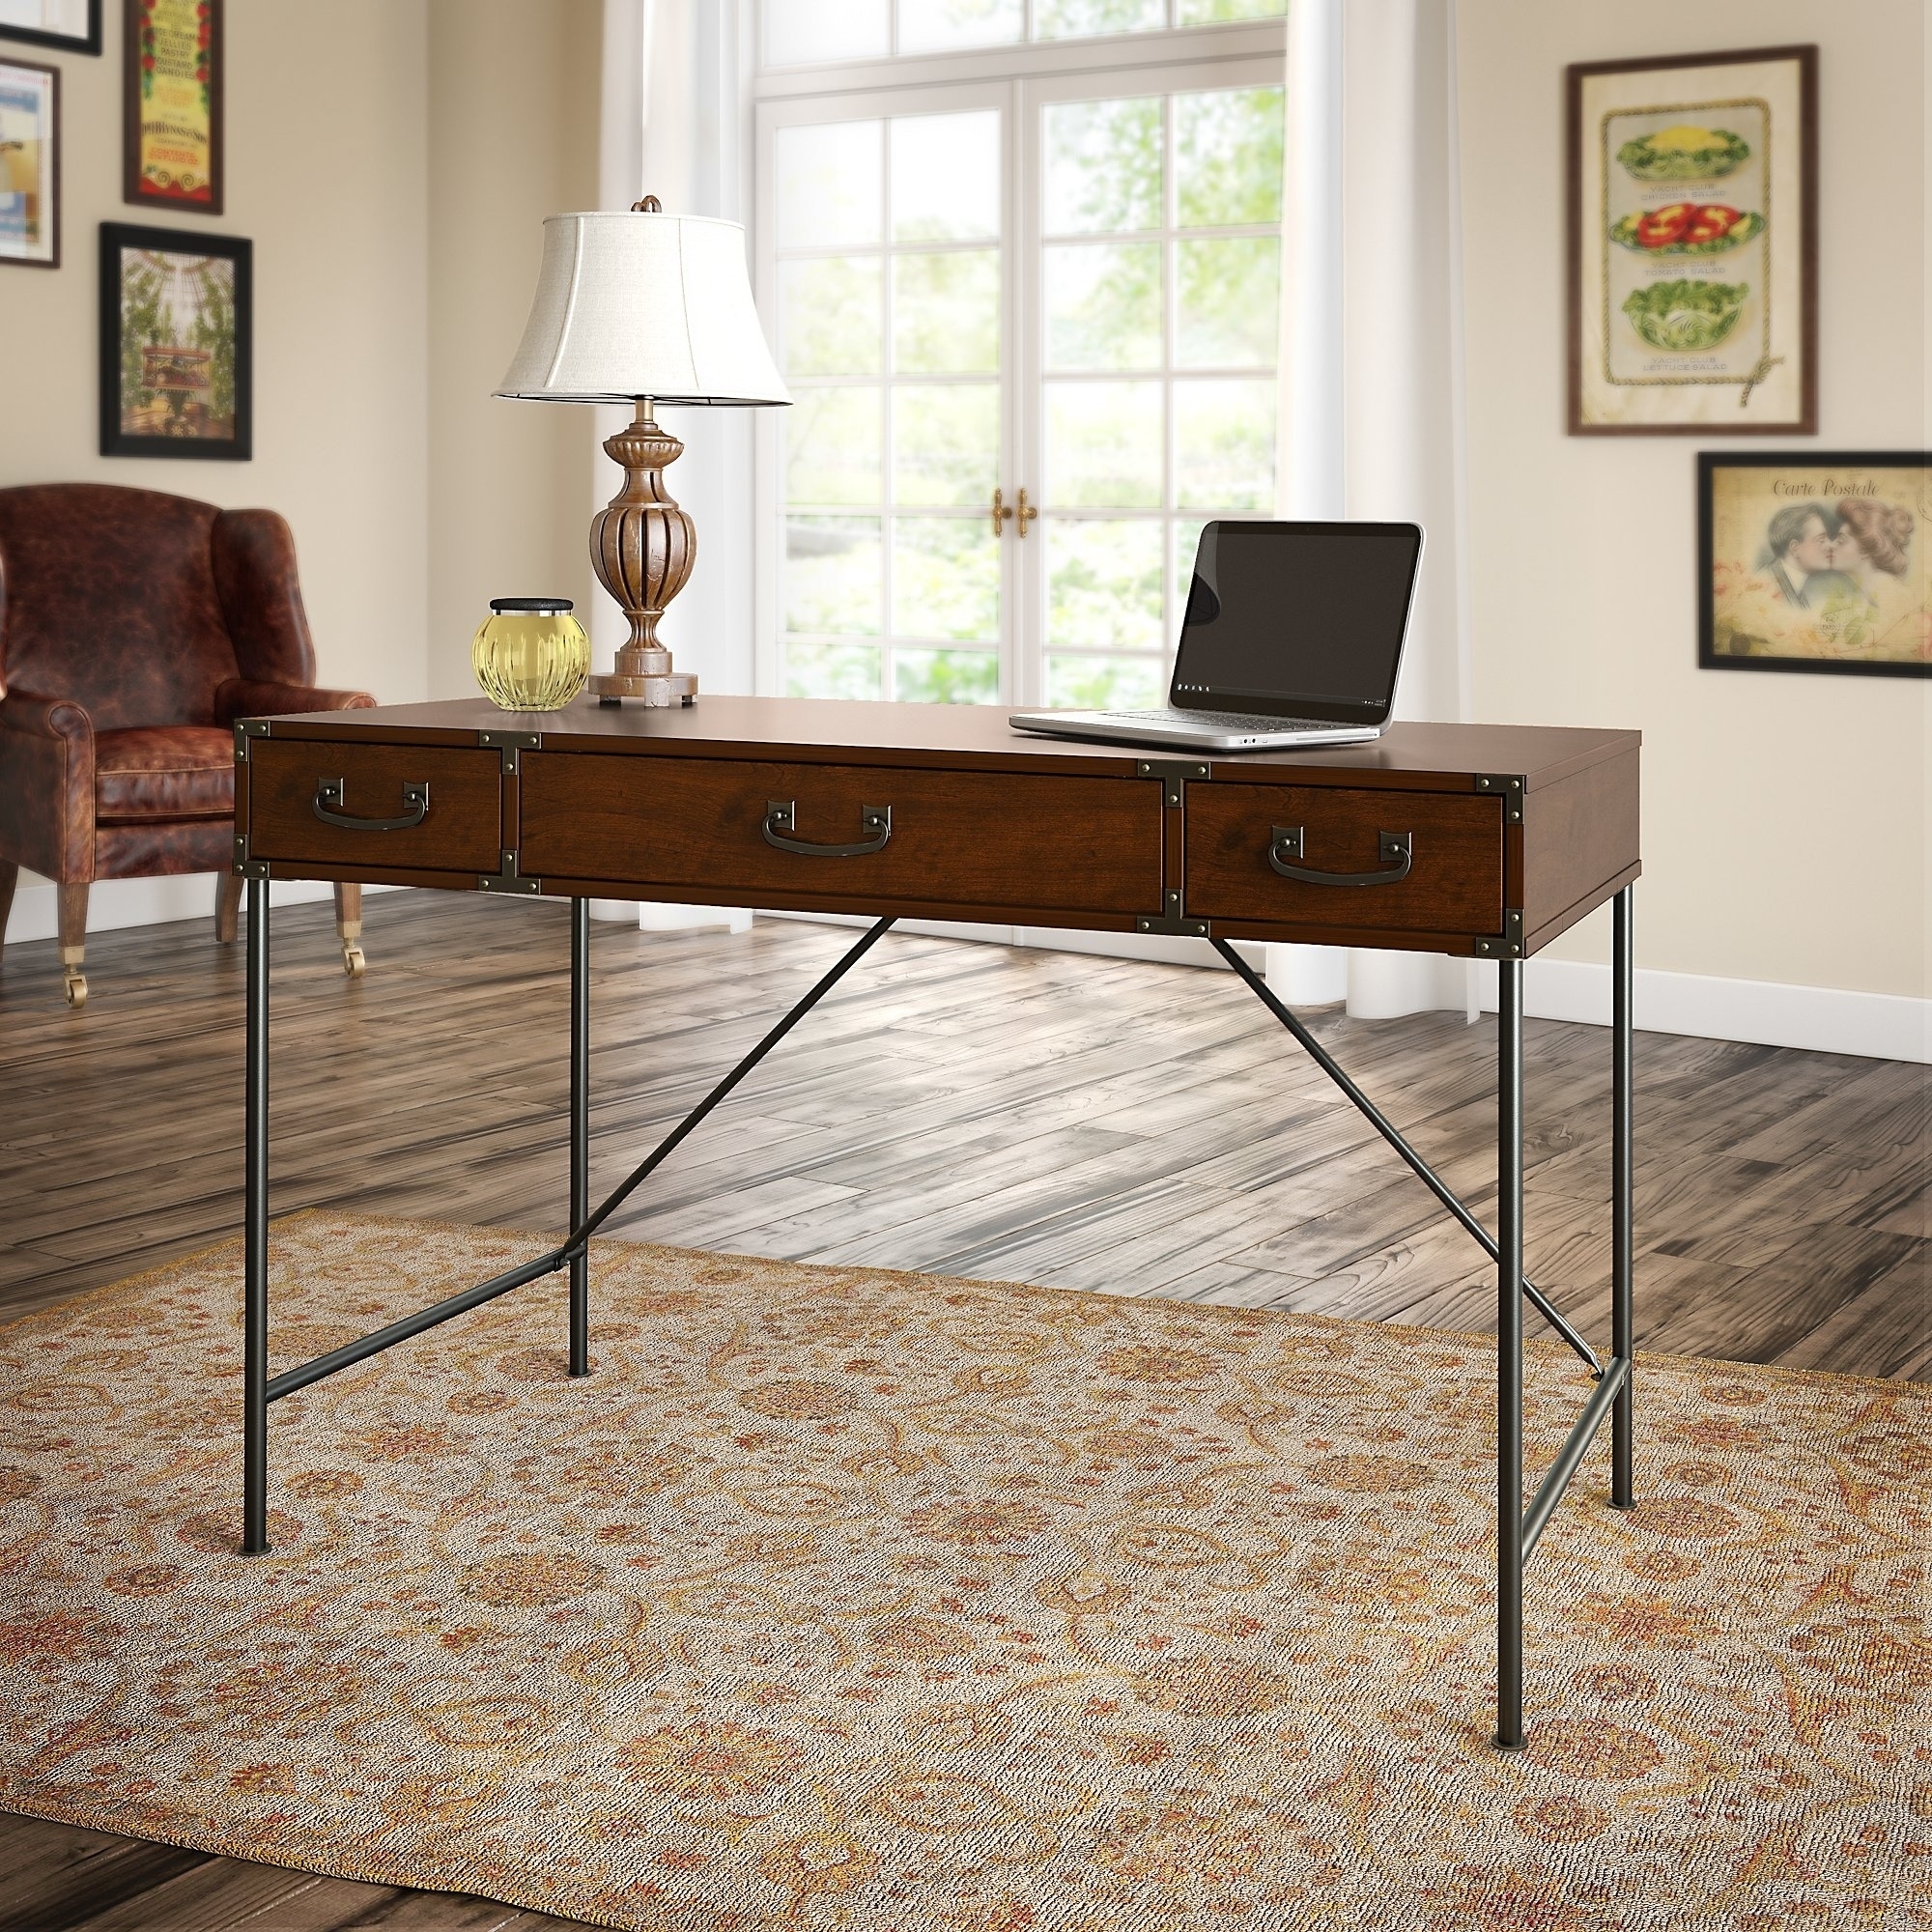 Shop Ironworks 48w Writing Desk From Kathy Ireland Home By Bush